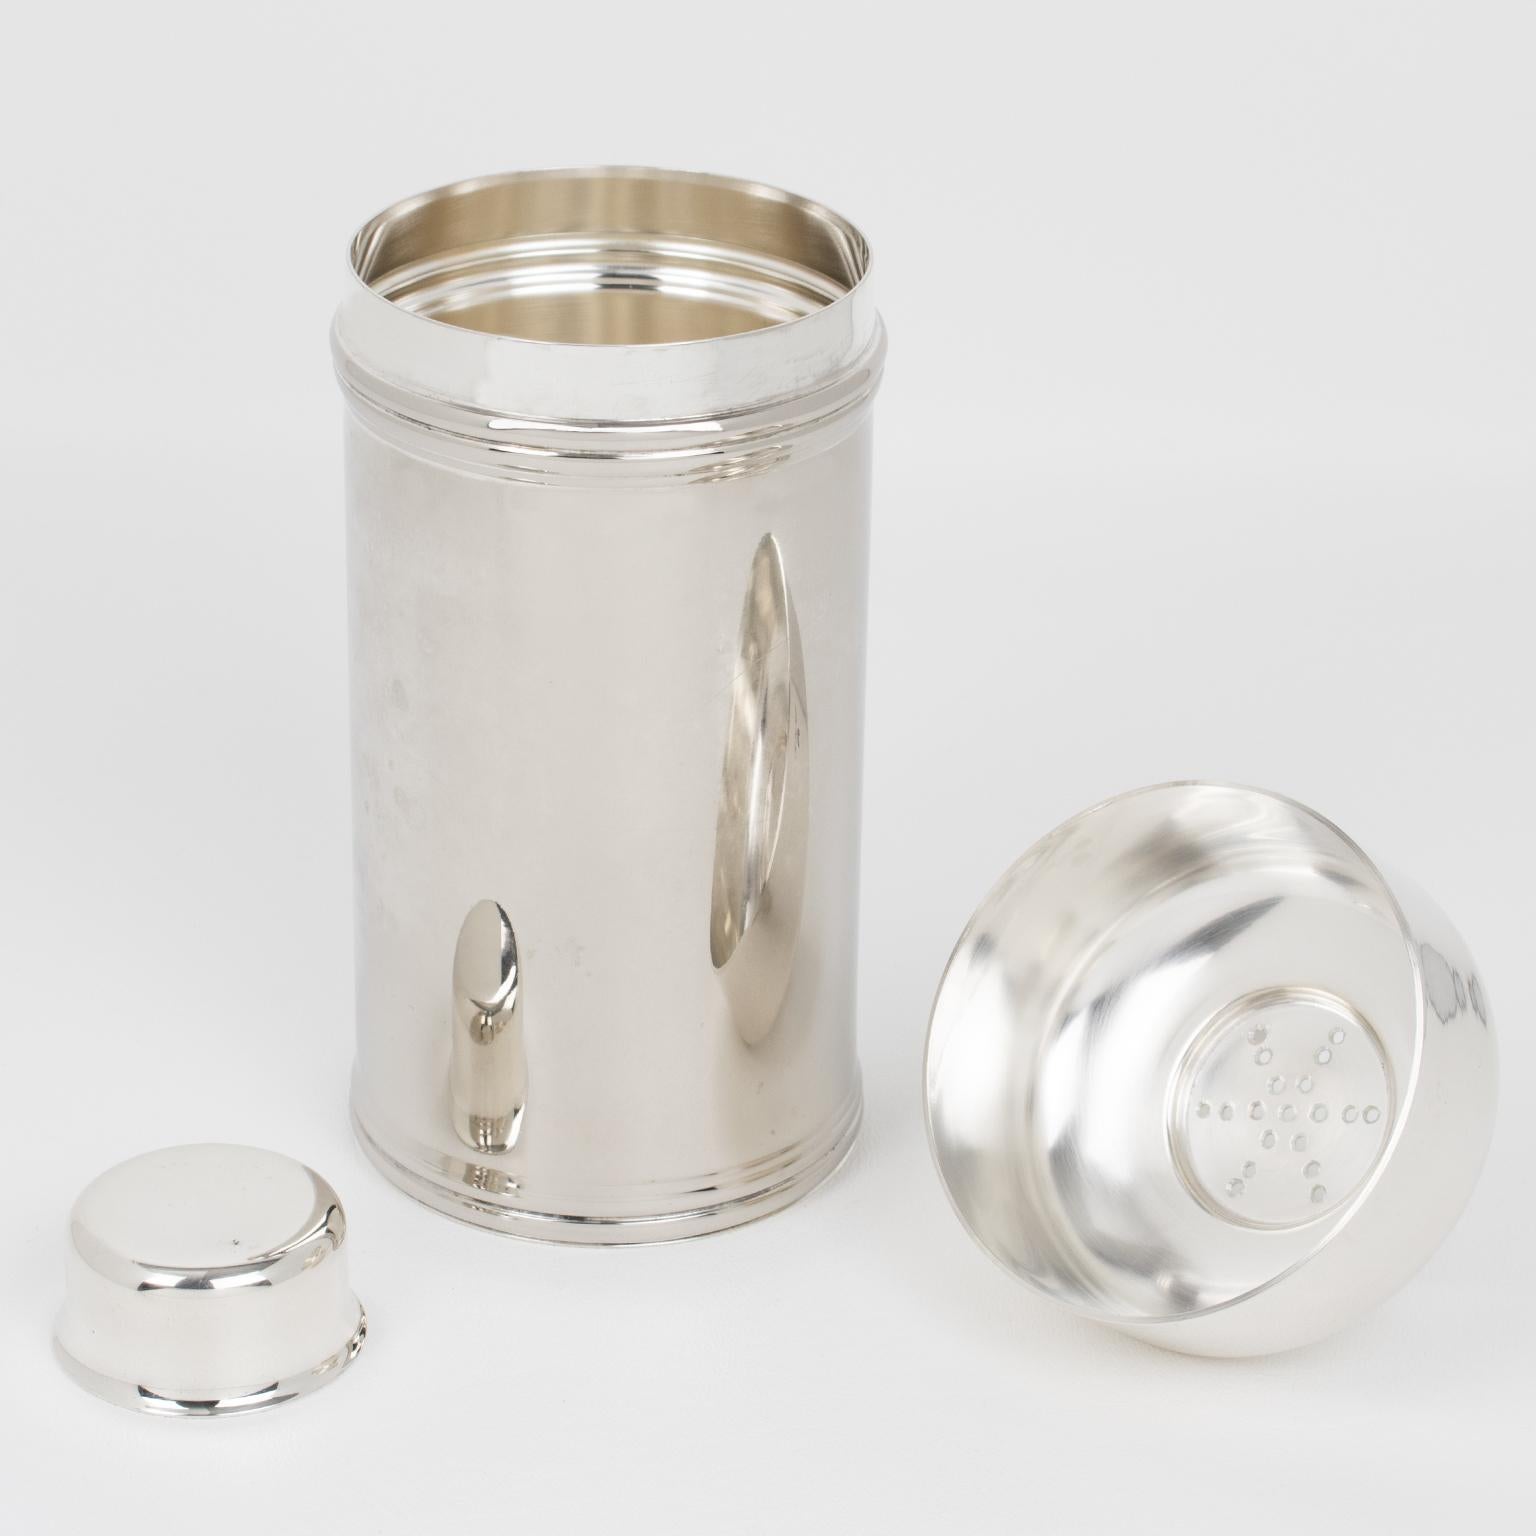 Italian Cesa 1882, Italy, Modernist Silver Plate Cocktail Shaker For Sale